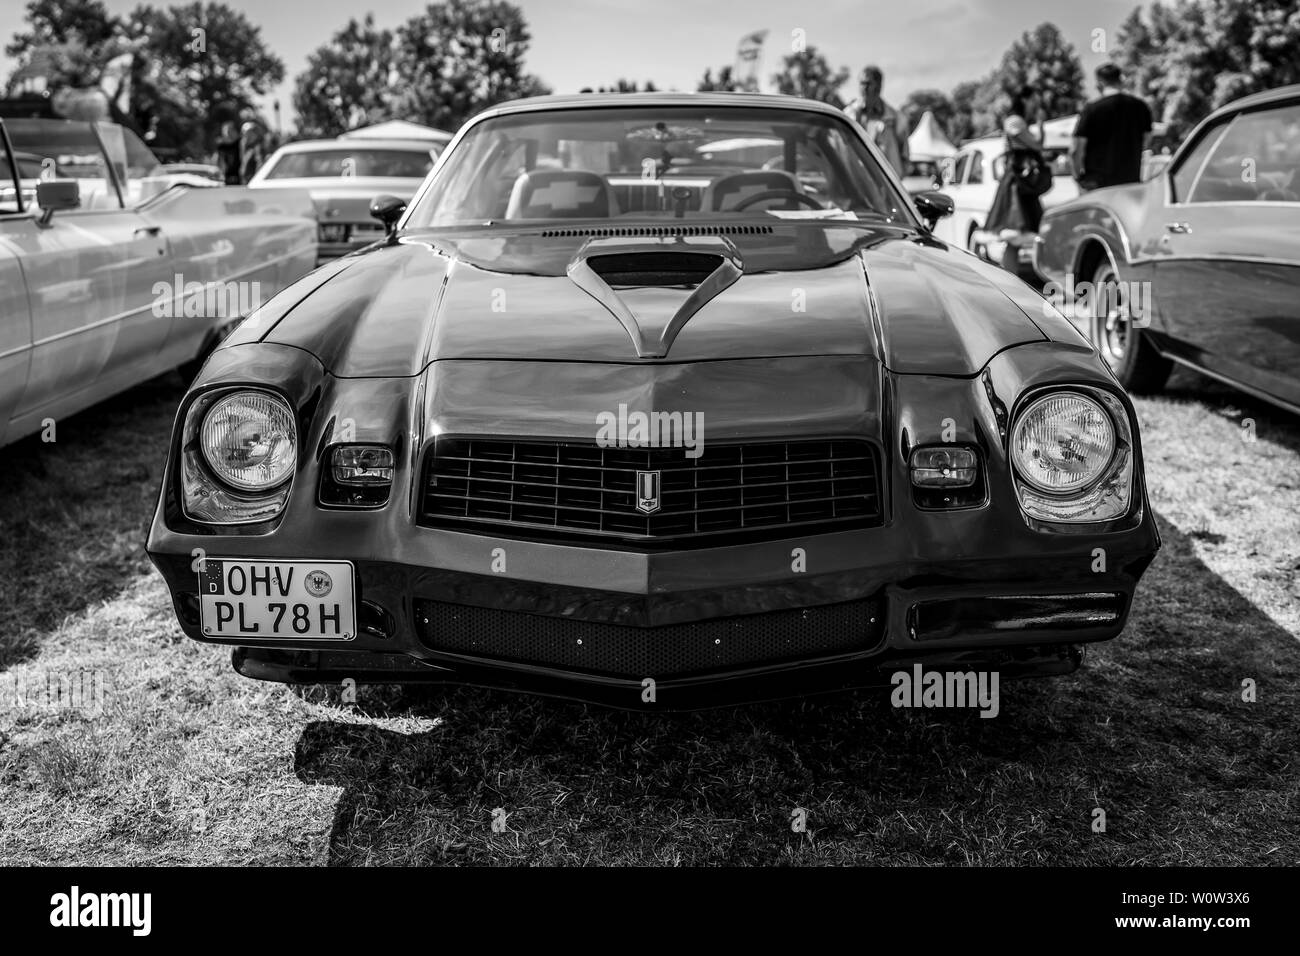 PAAREN IM GLIEN, GERMANY - MAY 19, 2018: Muscle car Chevrolet Camaro Z28 (second generation), 1979. Black and white. Exhibition 'Die Oldtimer Show 2018'. Stock Photo